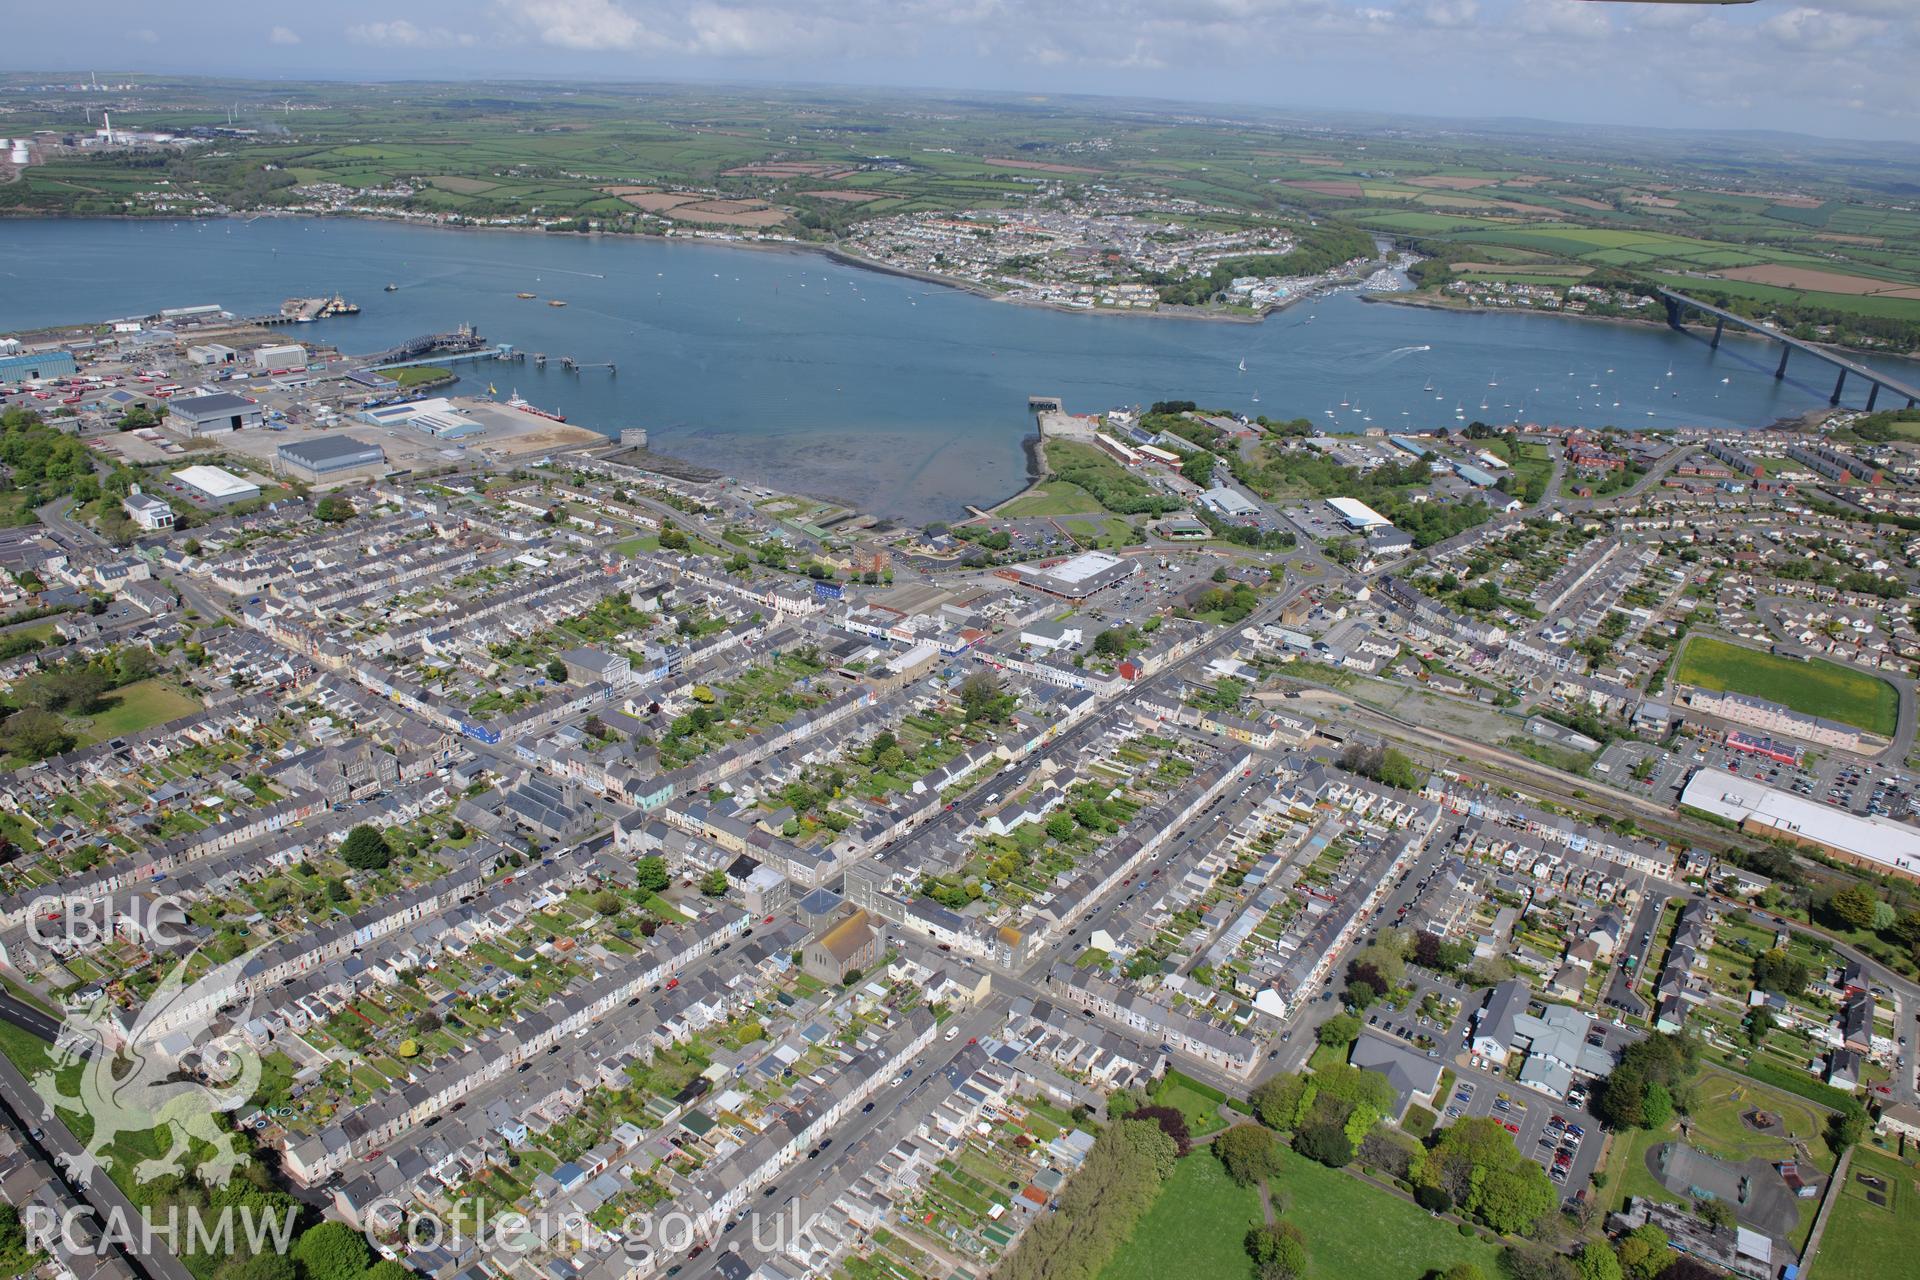 The town of Pembroke Dock, with the Cleddau Bridge leading to the town of Neyland in the distance. Oblique aerial photograph taken during the Royal Commission's programme of archaeological aerial reconnaissance by Toby Driver on 13th May 2015.